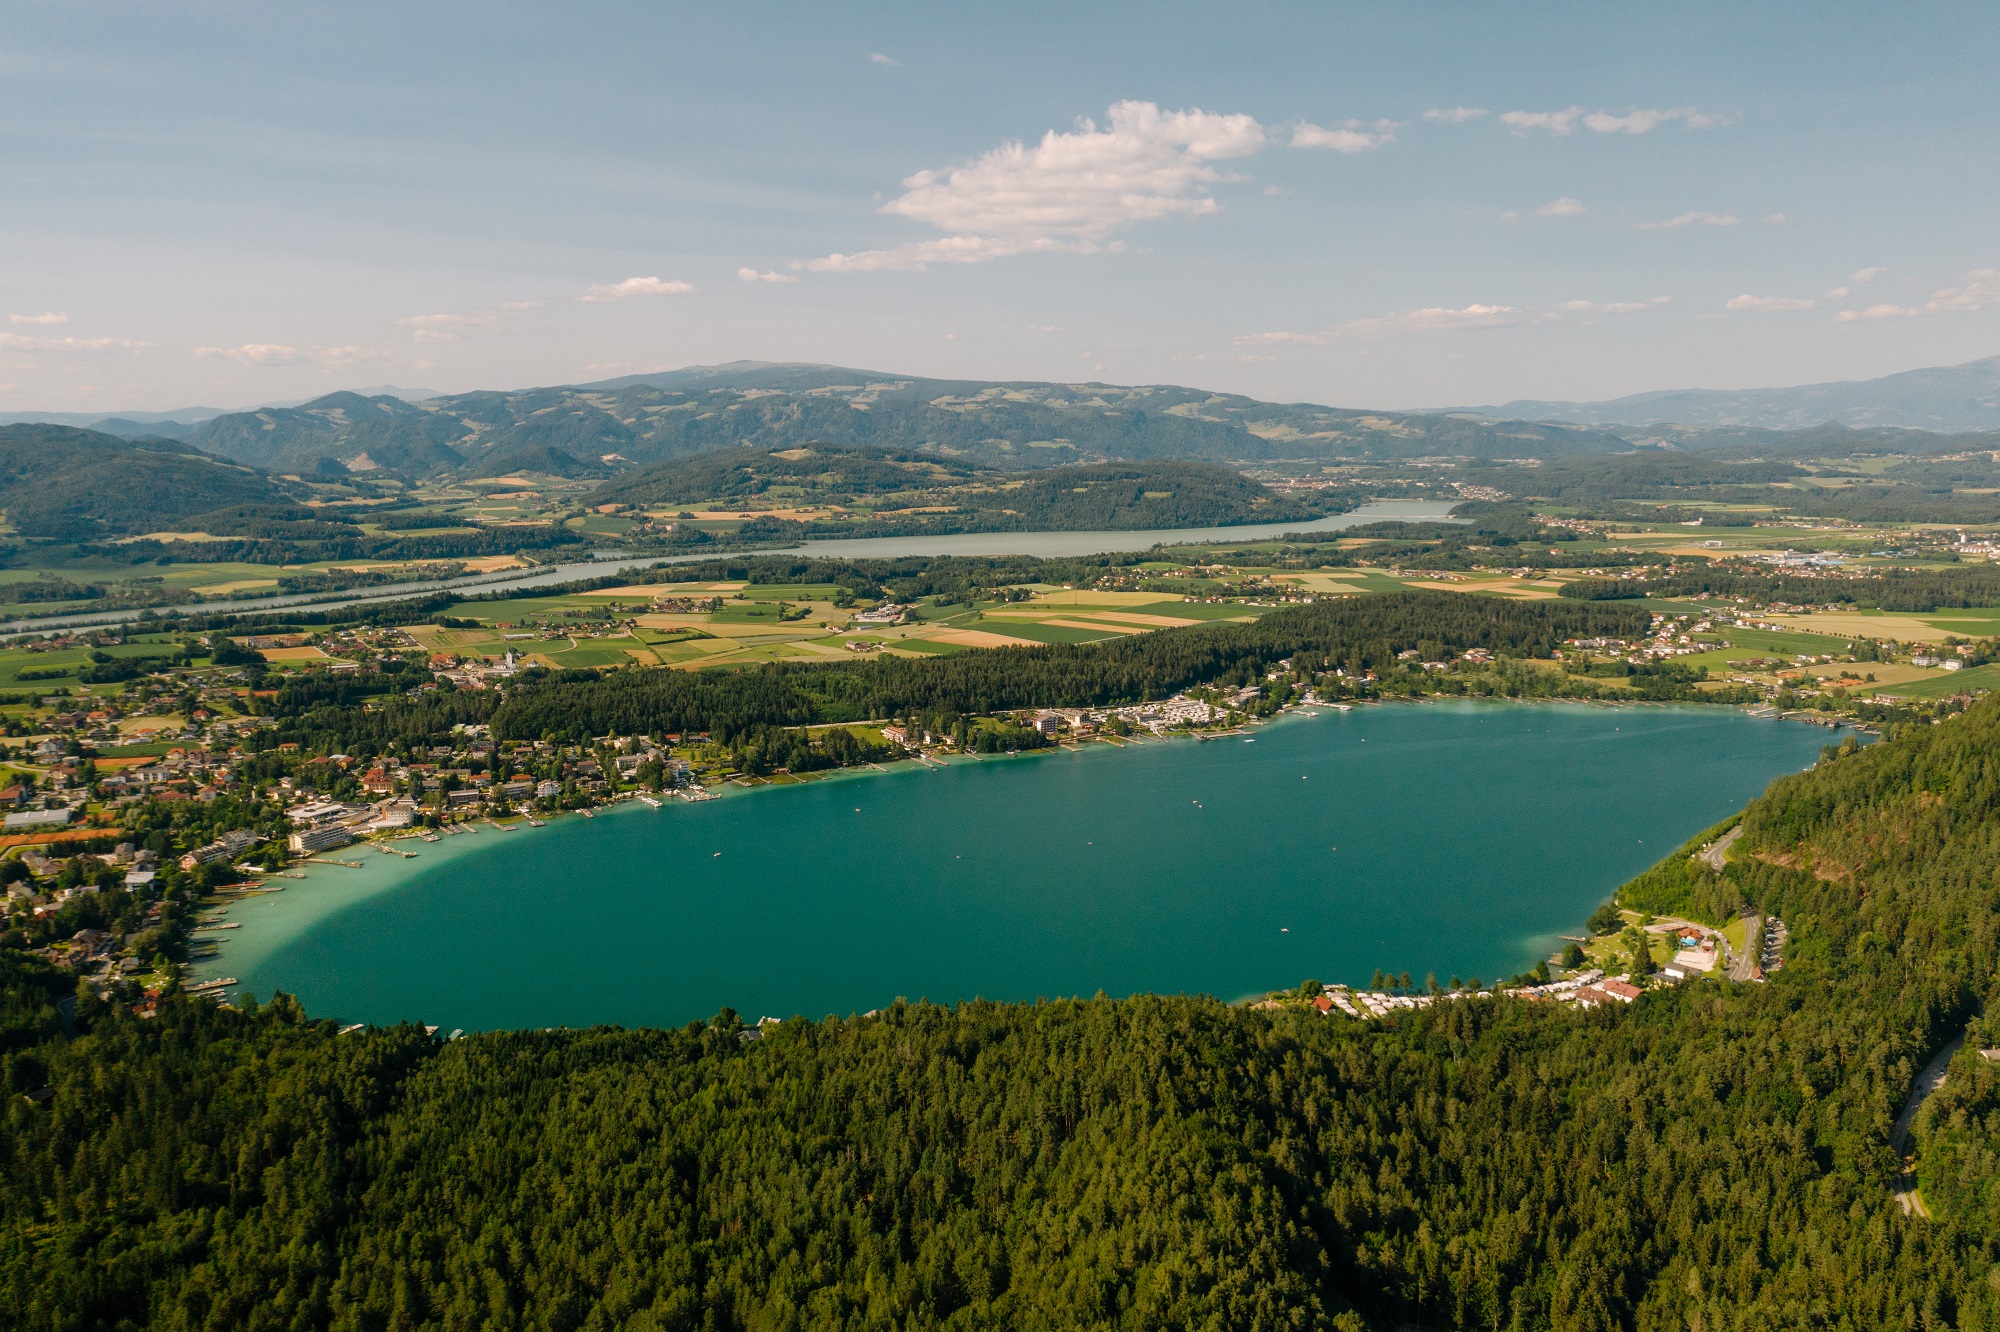 The Klopeiner See in Suedkaernten is ideal for cycling and swimming